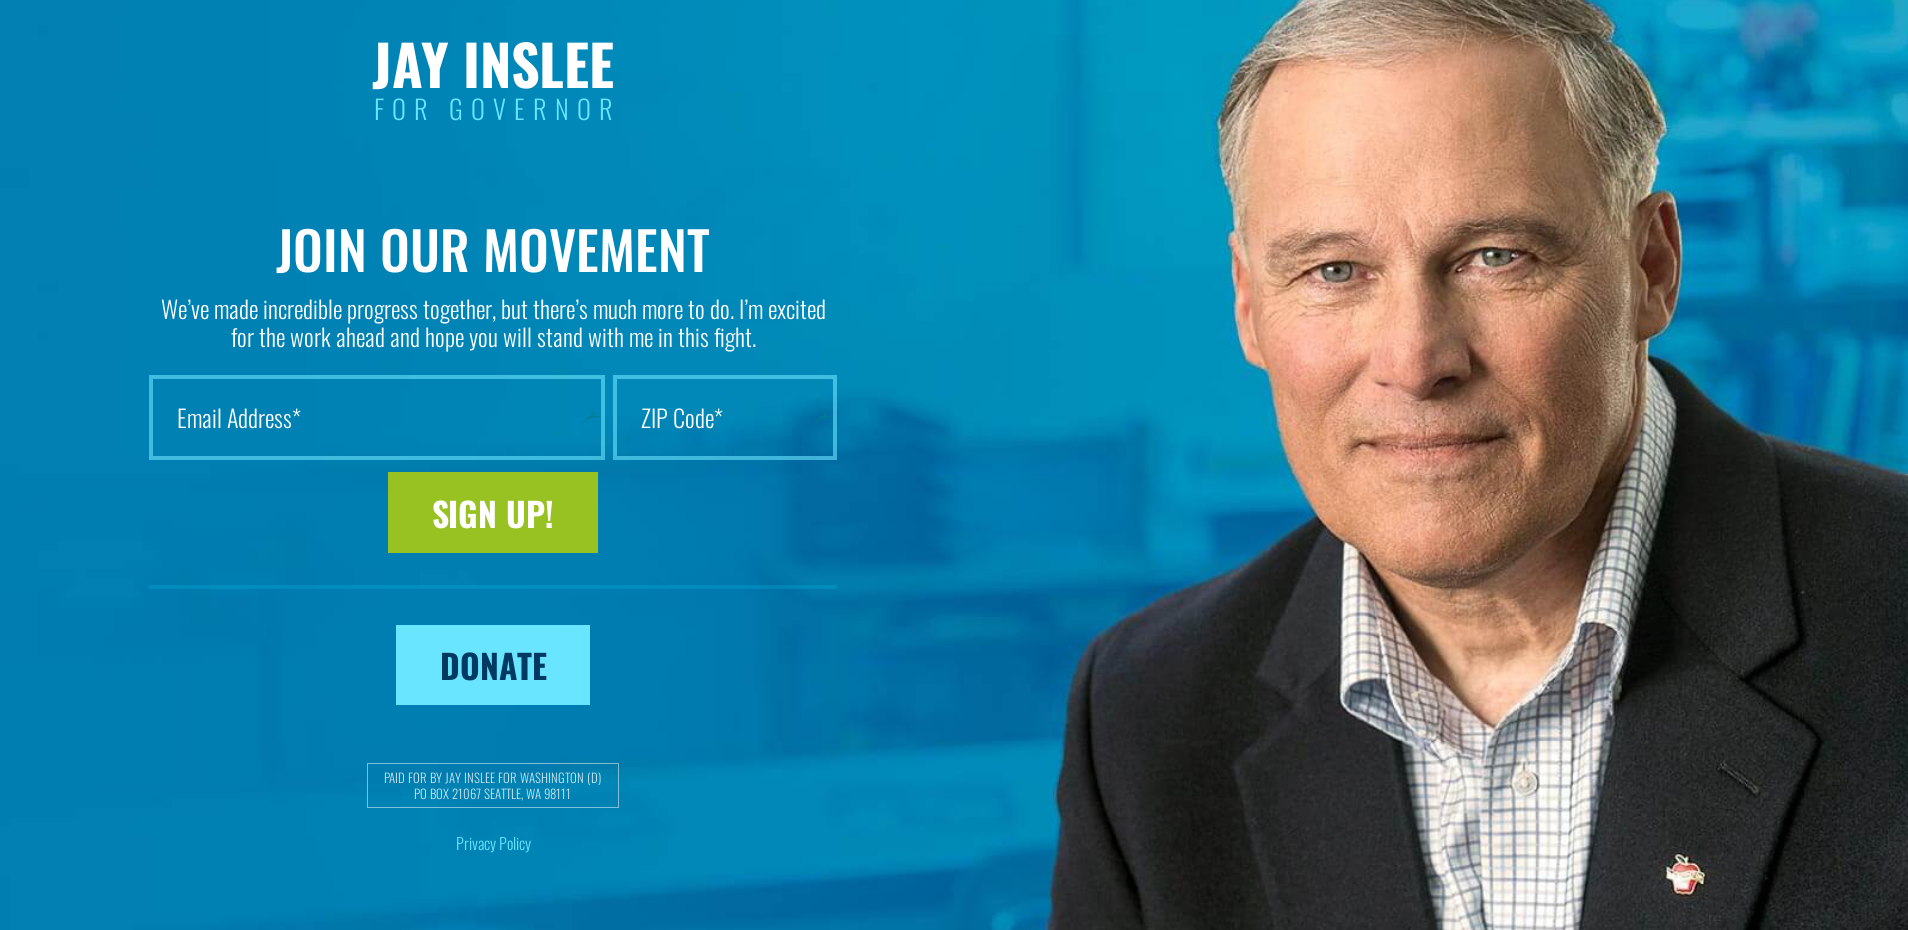 Splash page for Jay Inslee's reelection camapign